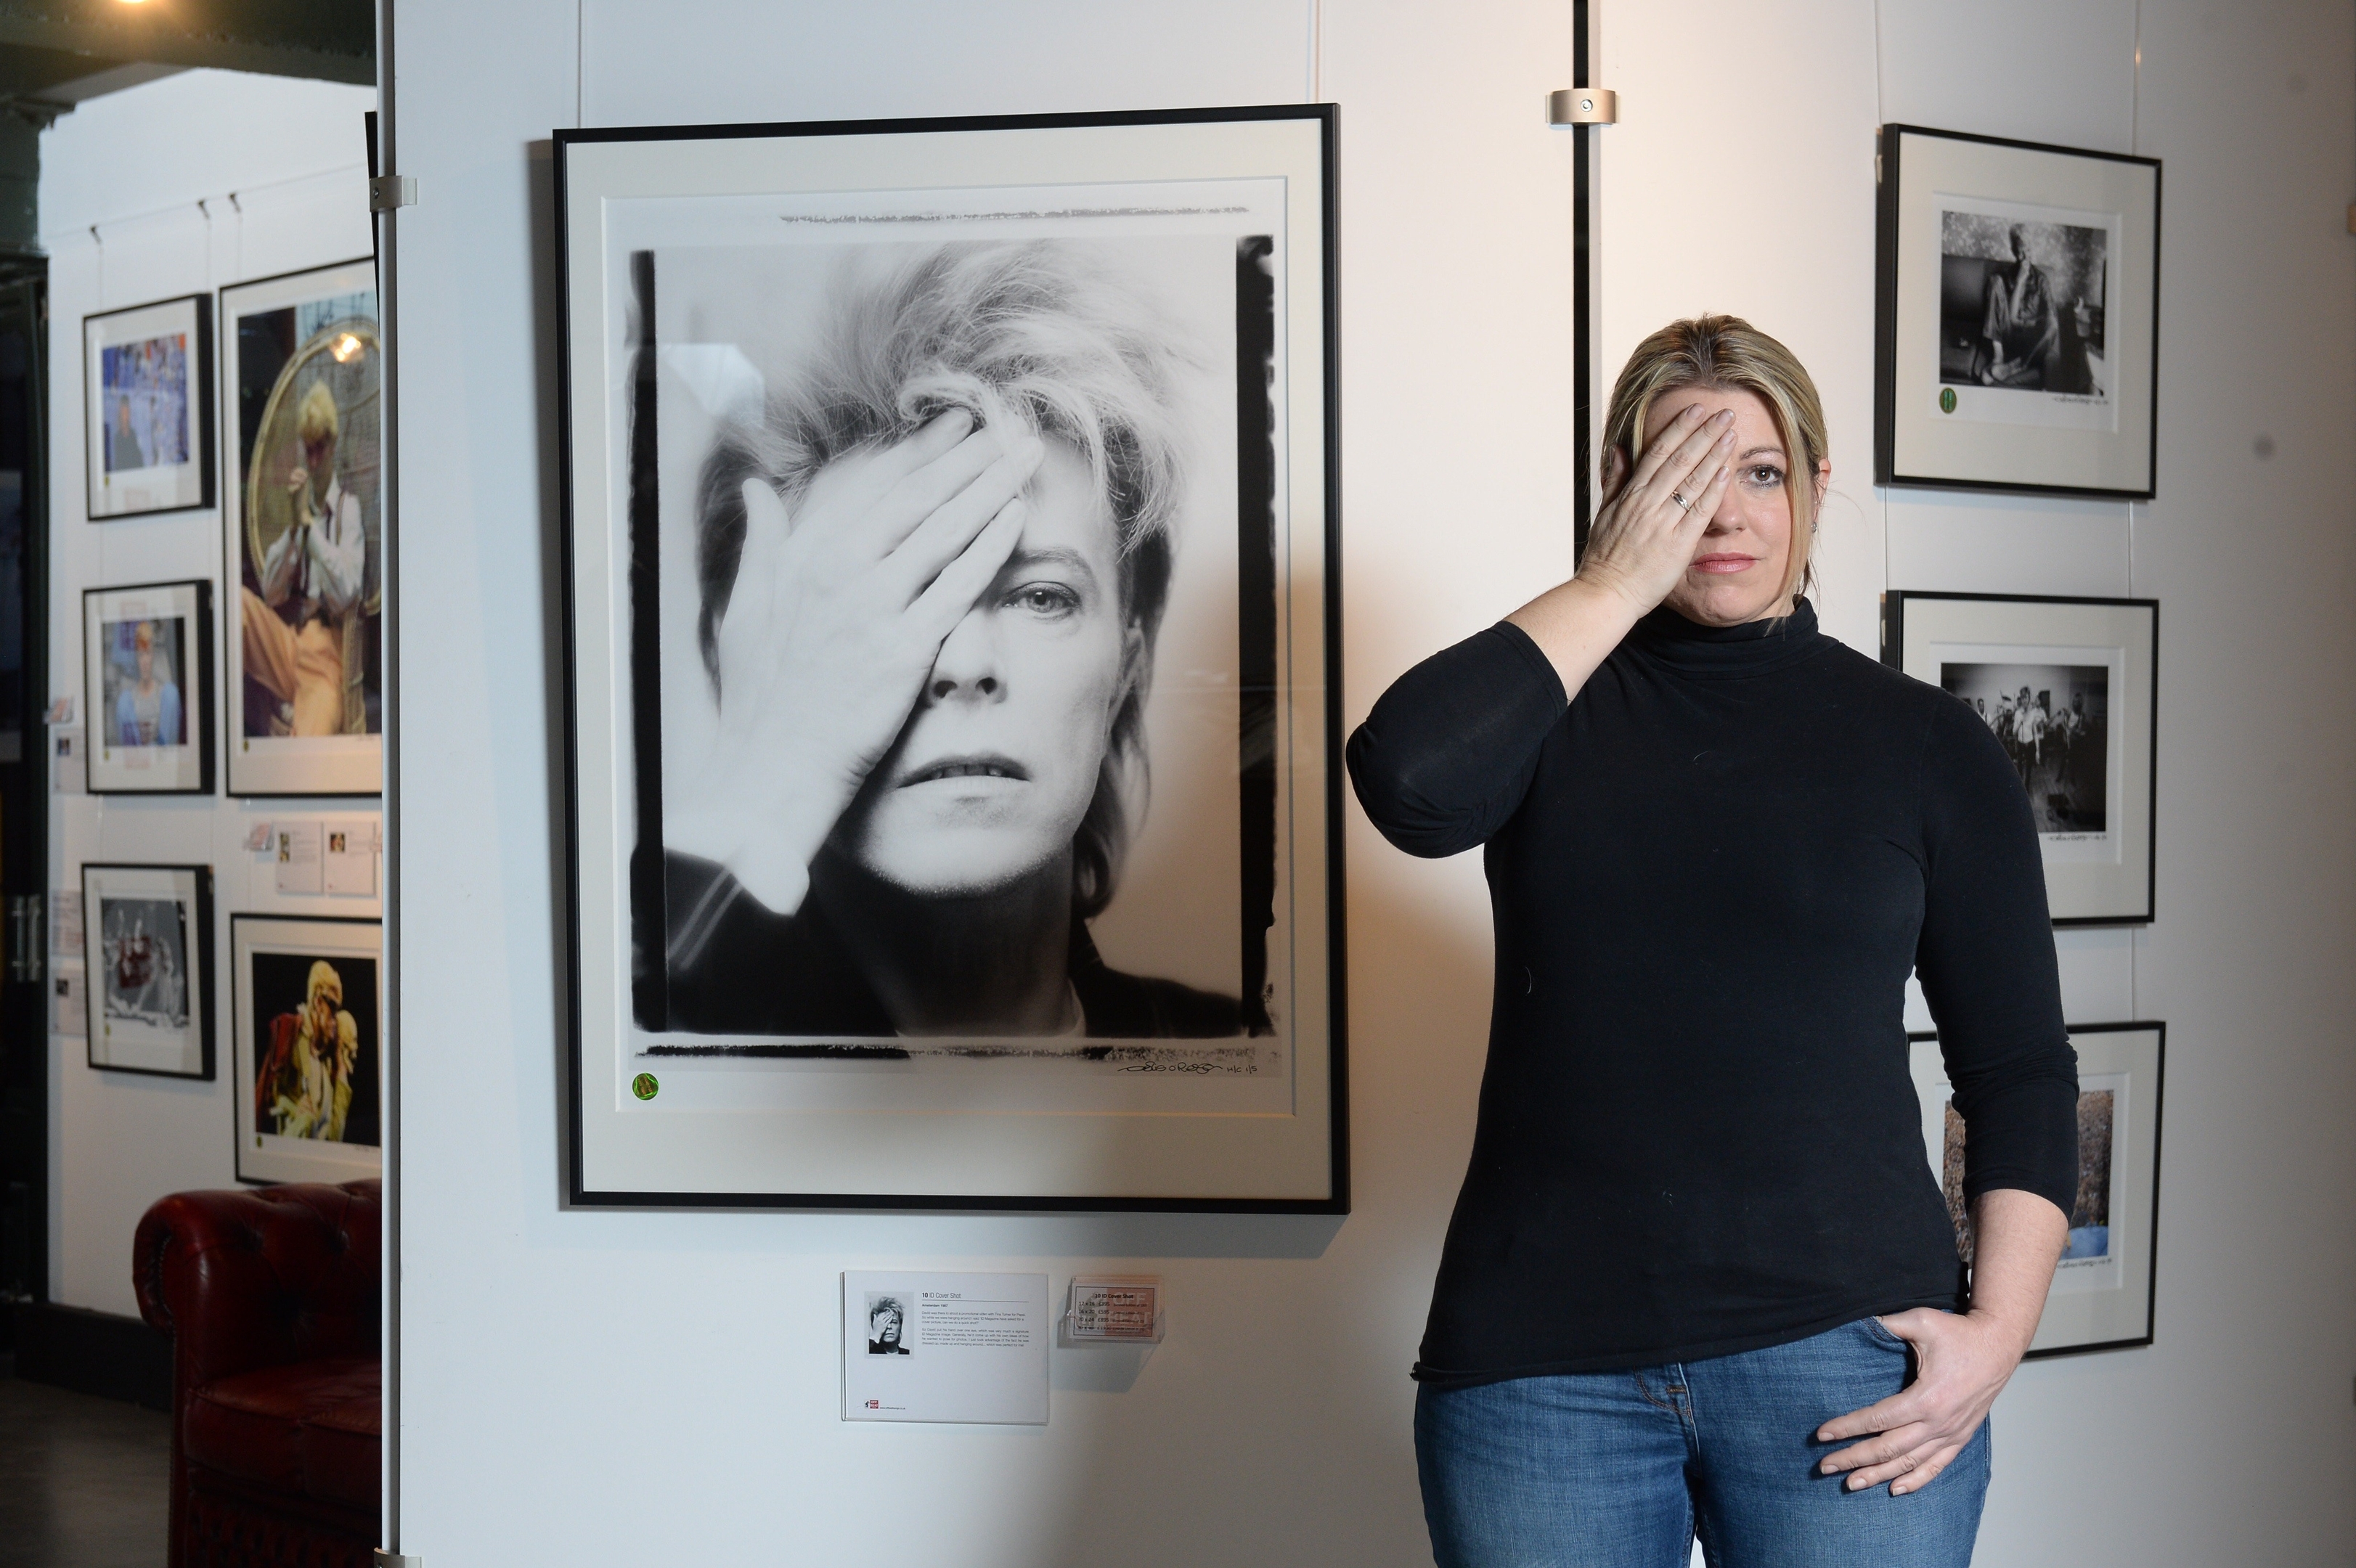 Jo Chandler from Off Beat Lounge at the Denis O'Regan, David Bowie Photography exhibition in Glasgow.